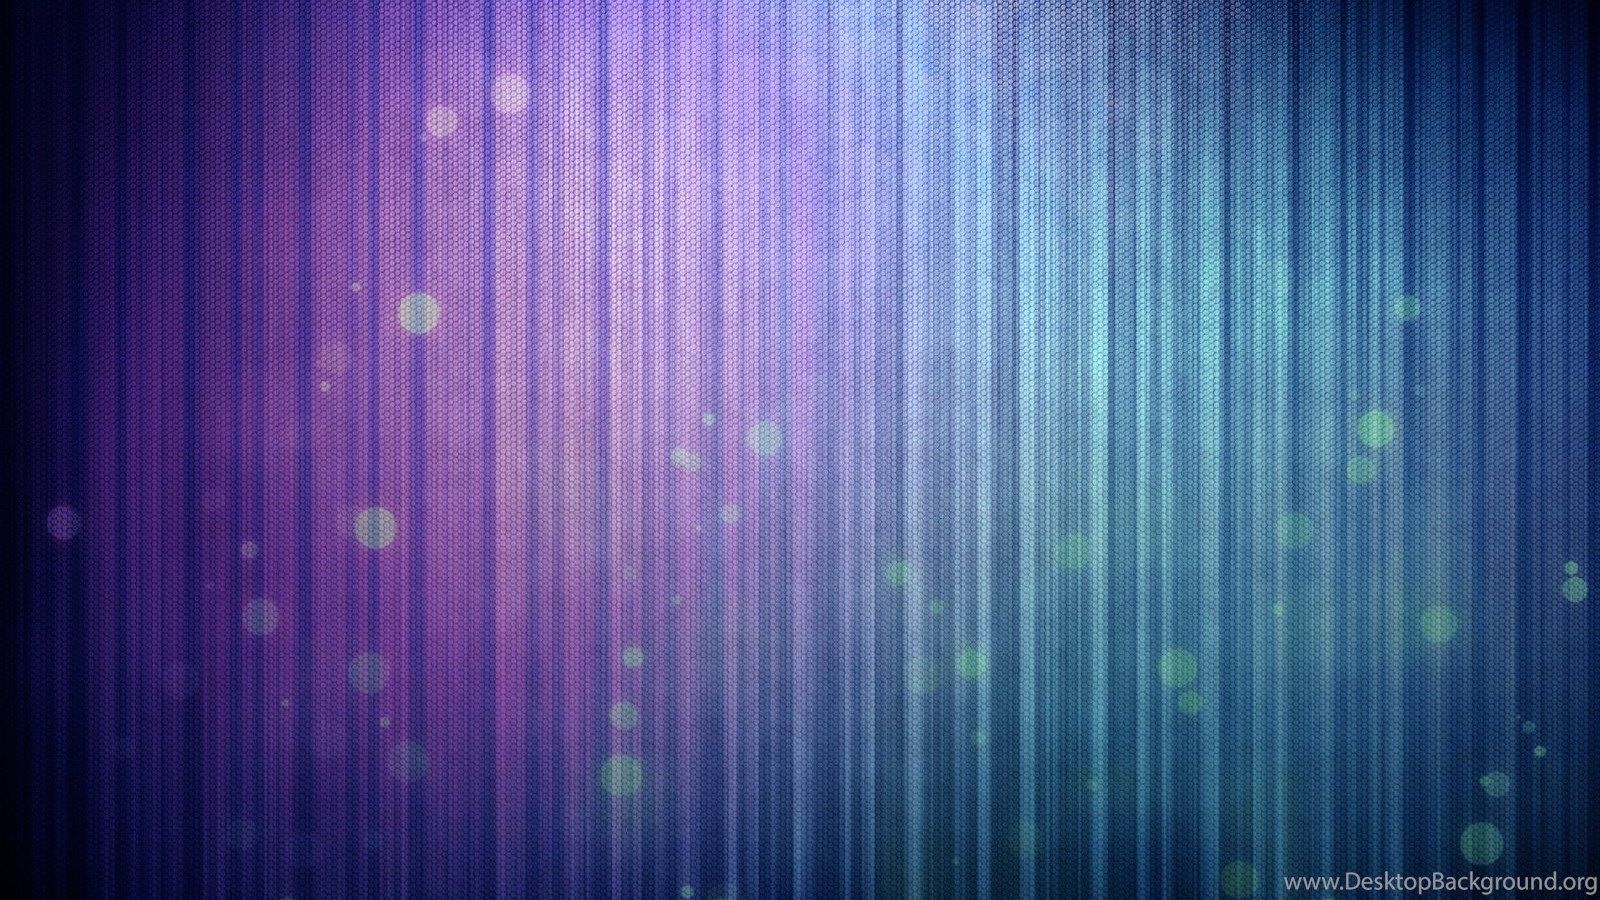 Wallpaper Free Computer, Abstract Purple Background, A Great Fit. Desktop Background